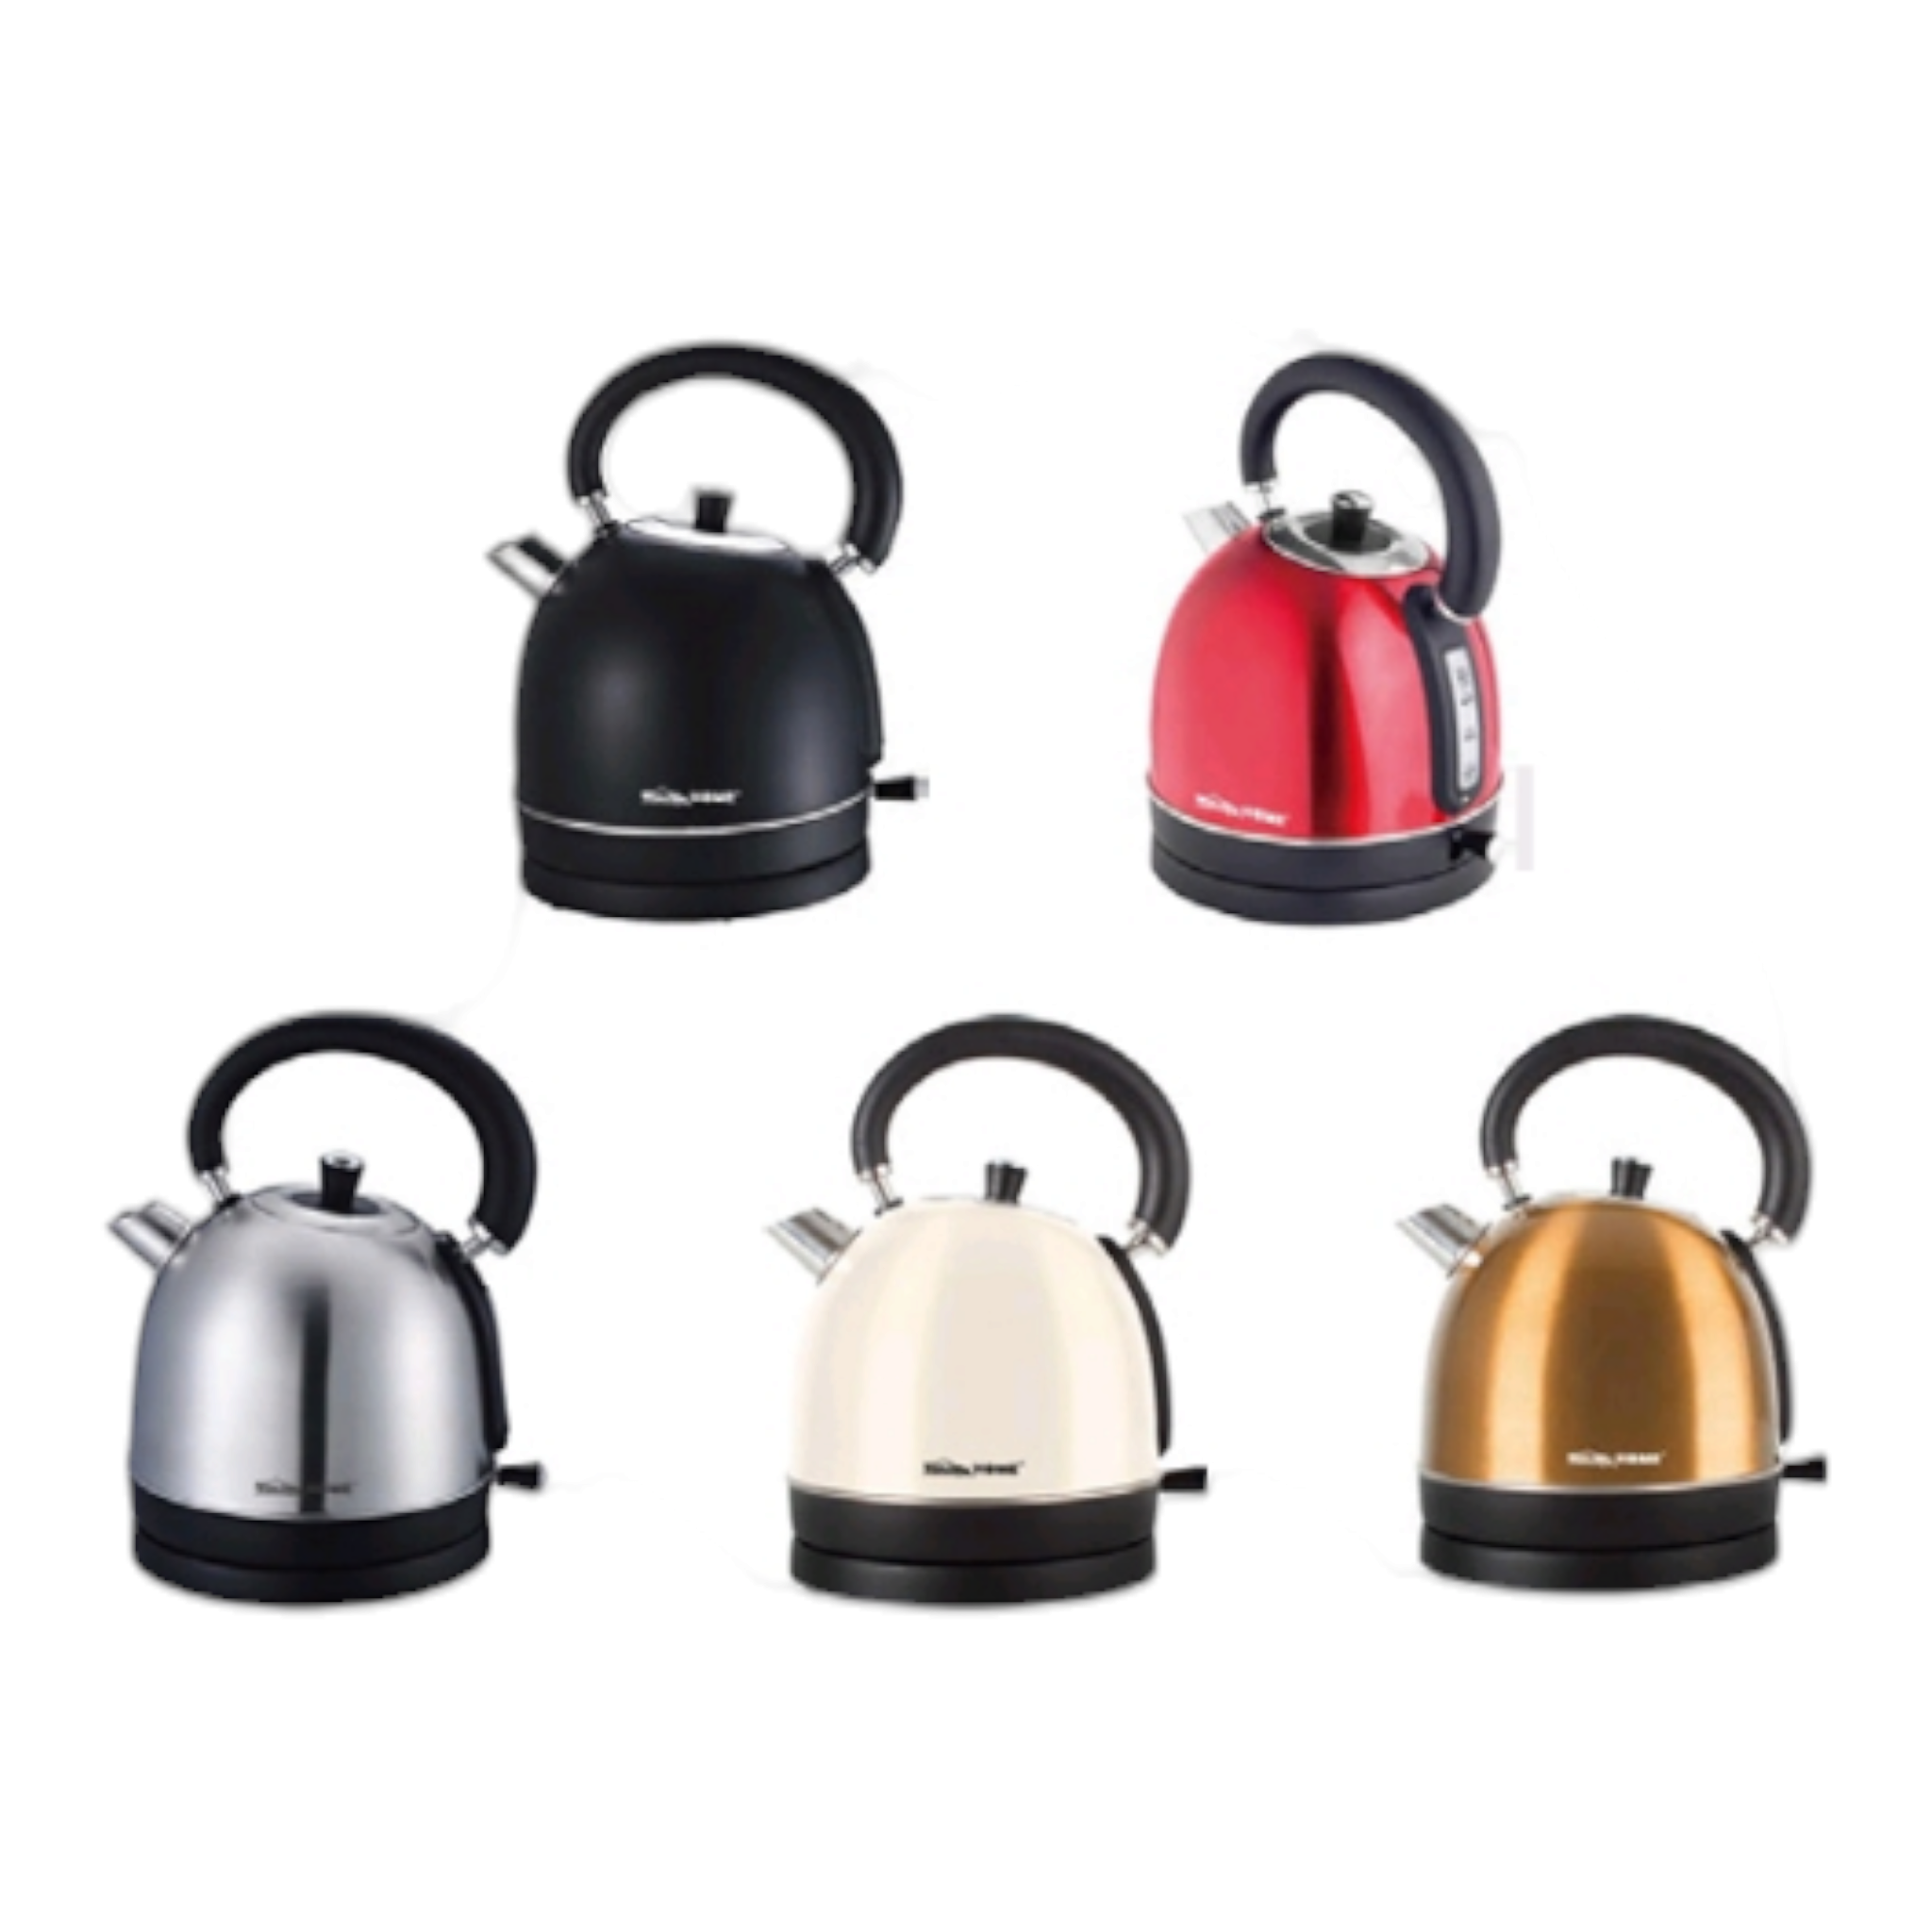 Totally Home 1.8L Dome Kettle TH98